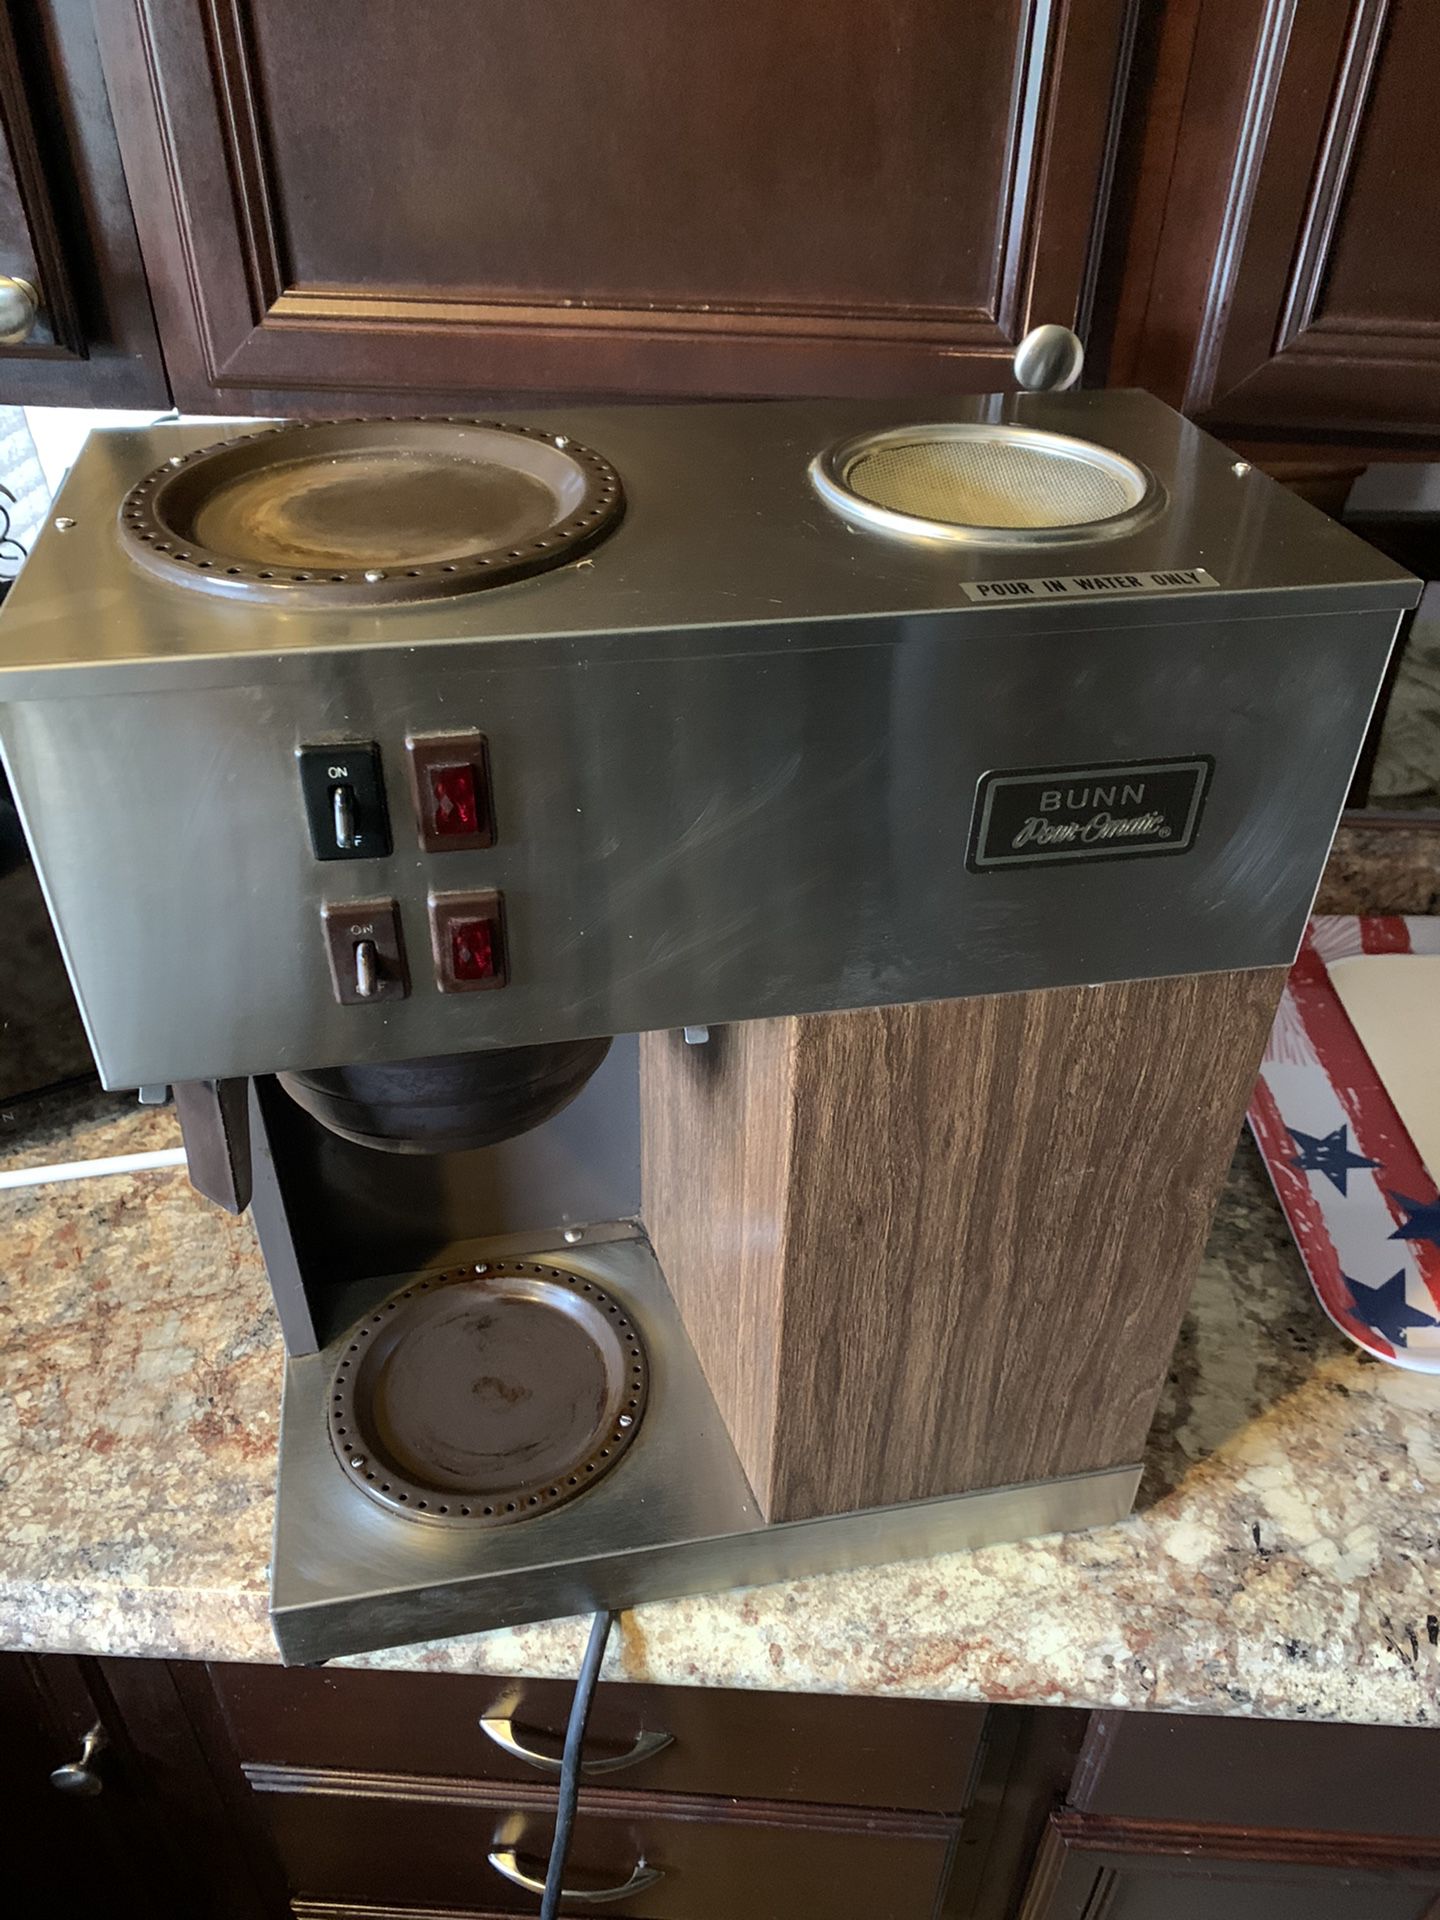 Commercial coffee maker